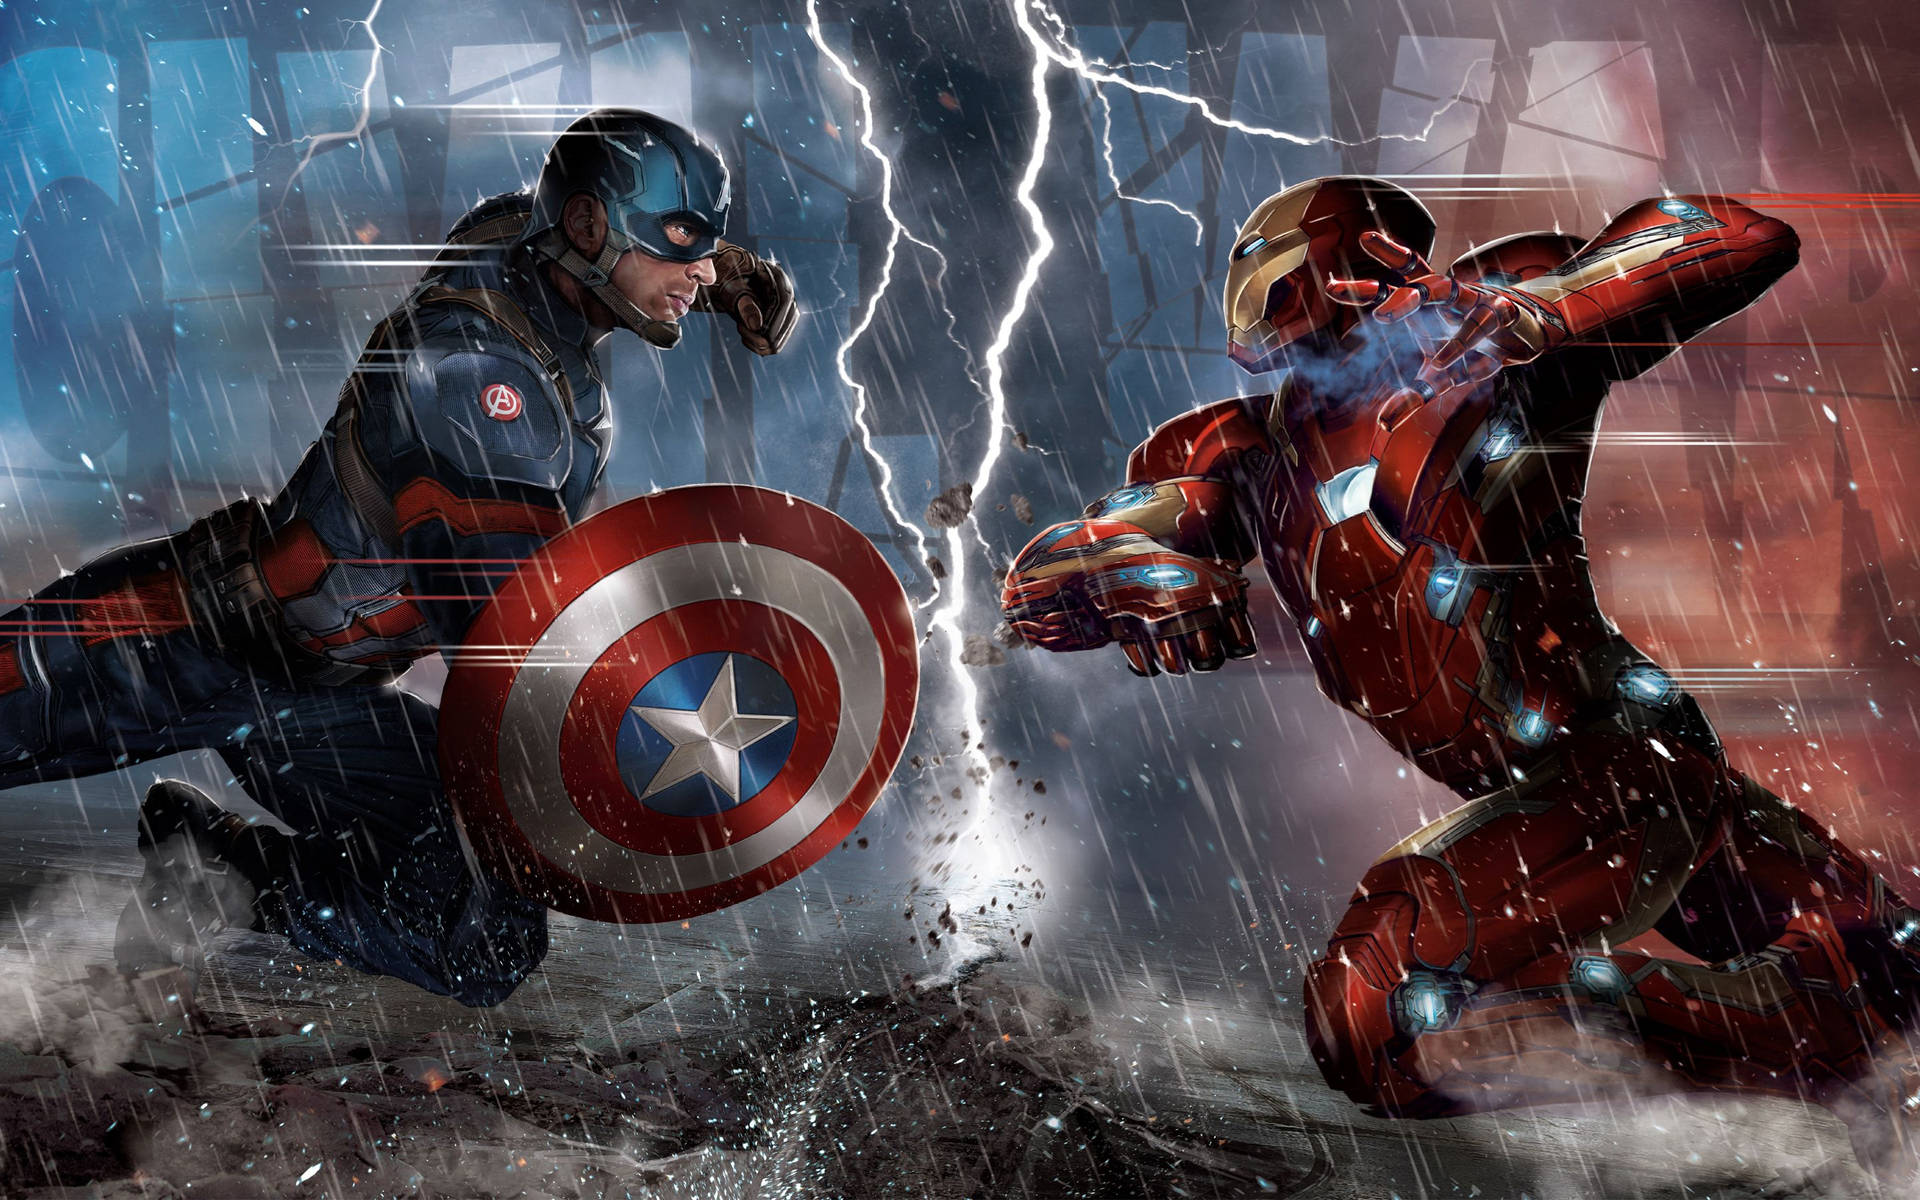 628 Marvel Wallpapers & Backgrounds For